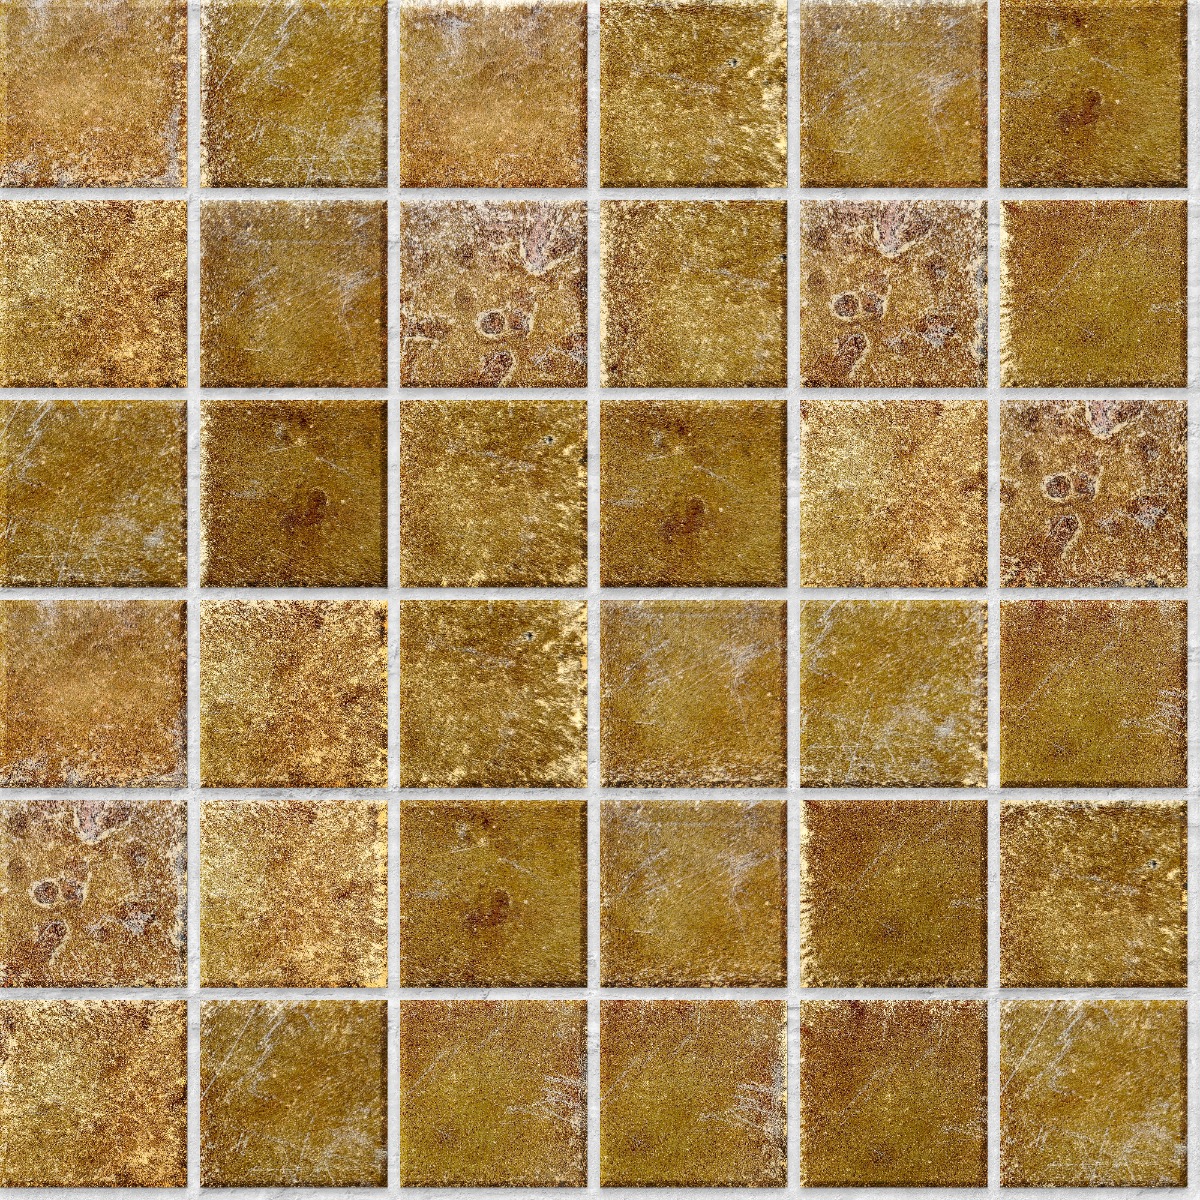 A seamless tile texture with jongh tile tiles arranged in a Stack pattern